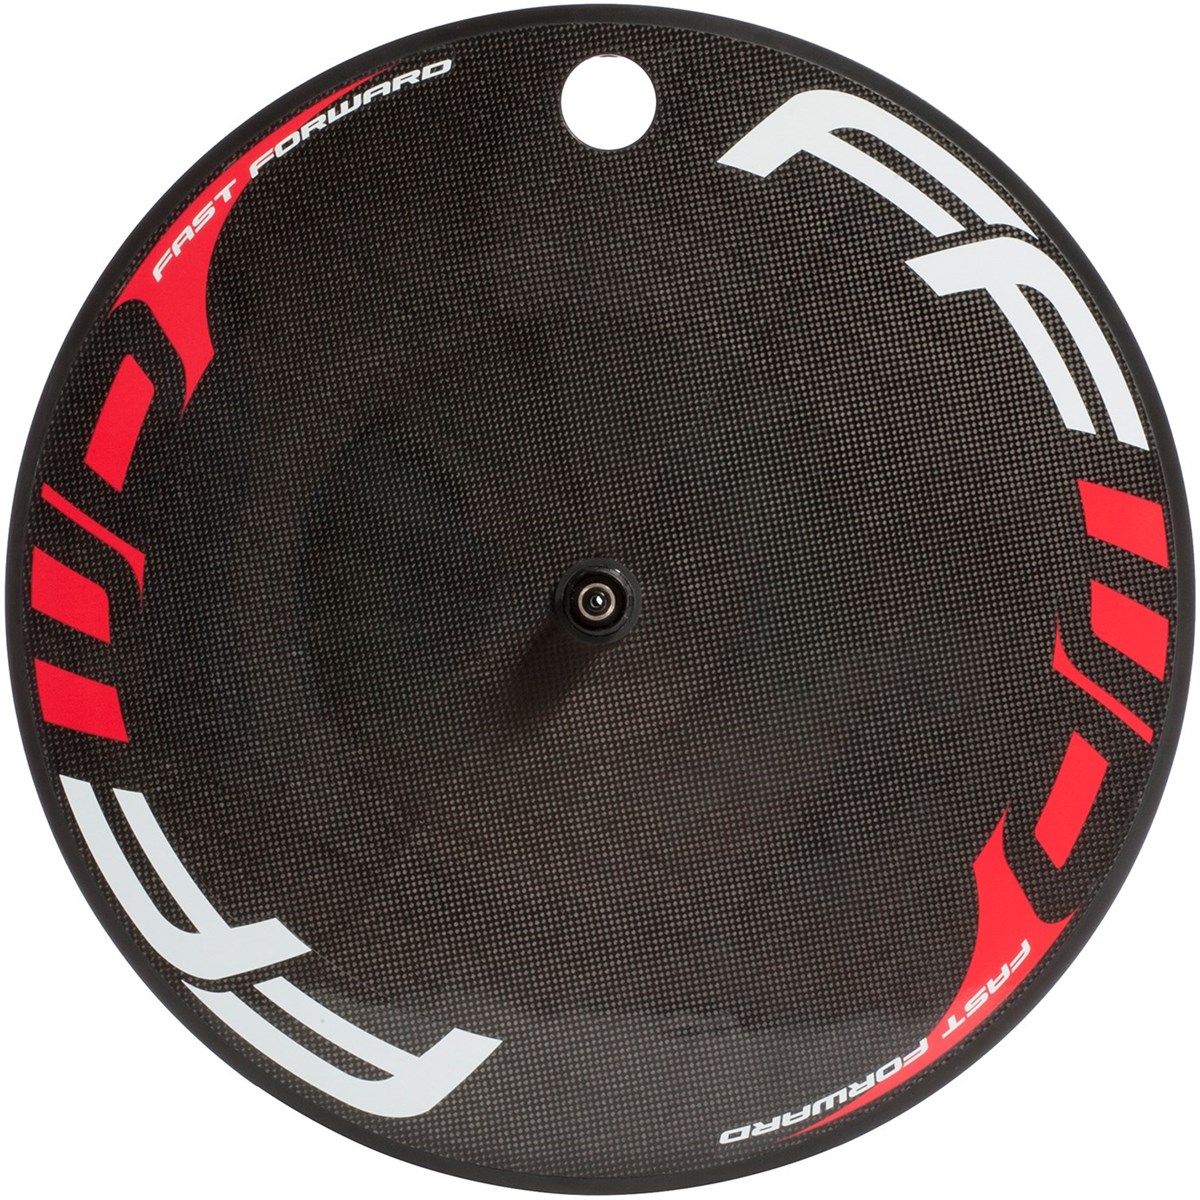 Fast Forward Full Carbon Clincher Disc Wheel product image